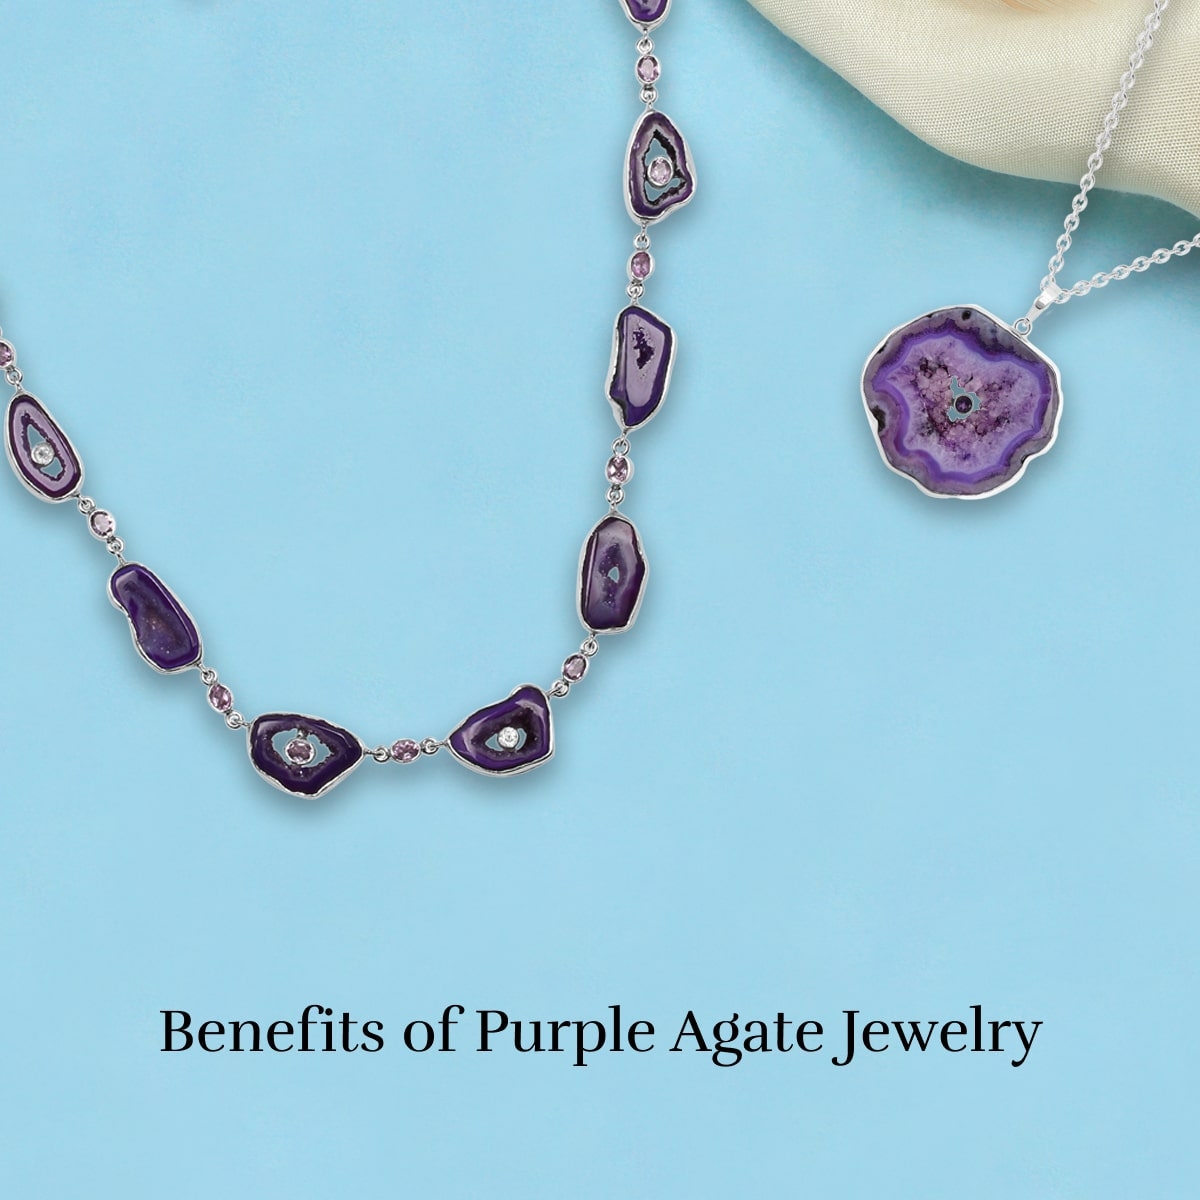 Advantages of Wearing Purple Agate Jewelry